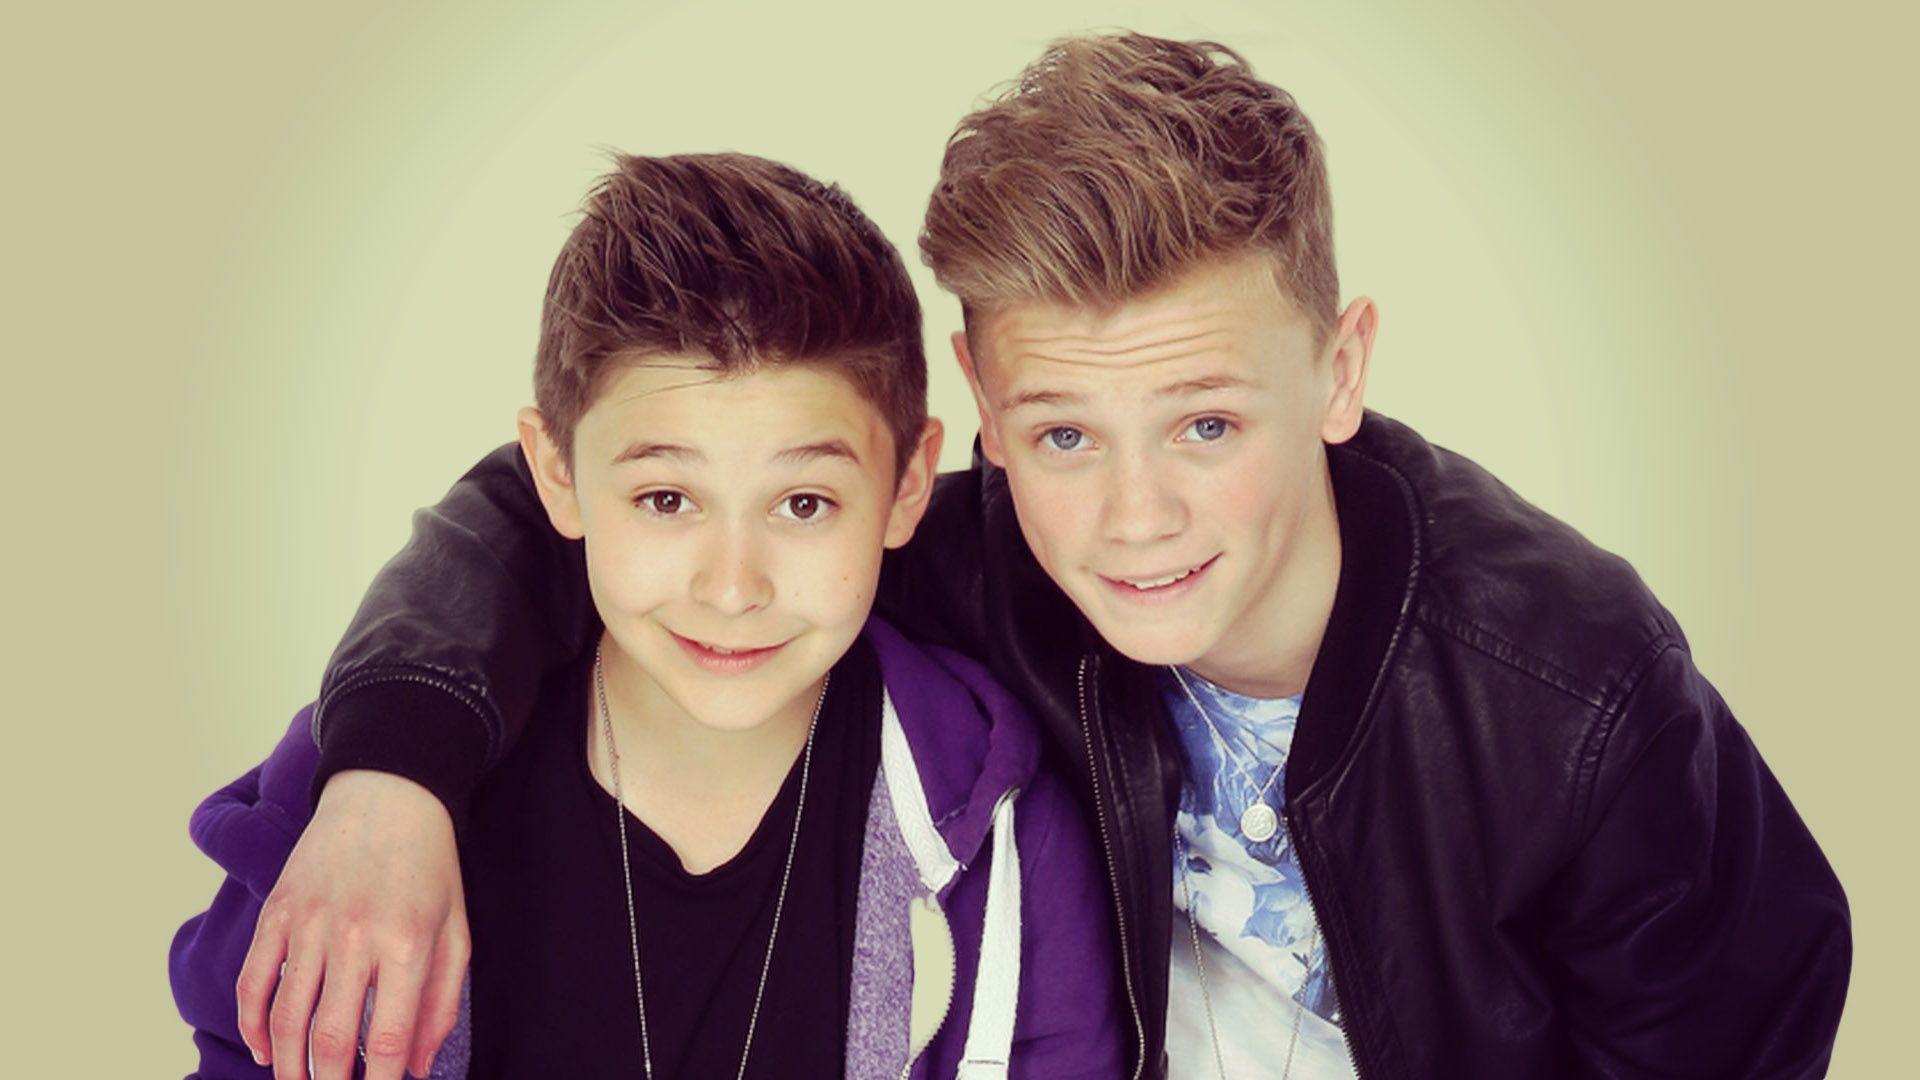 Bars and melody net worth